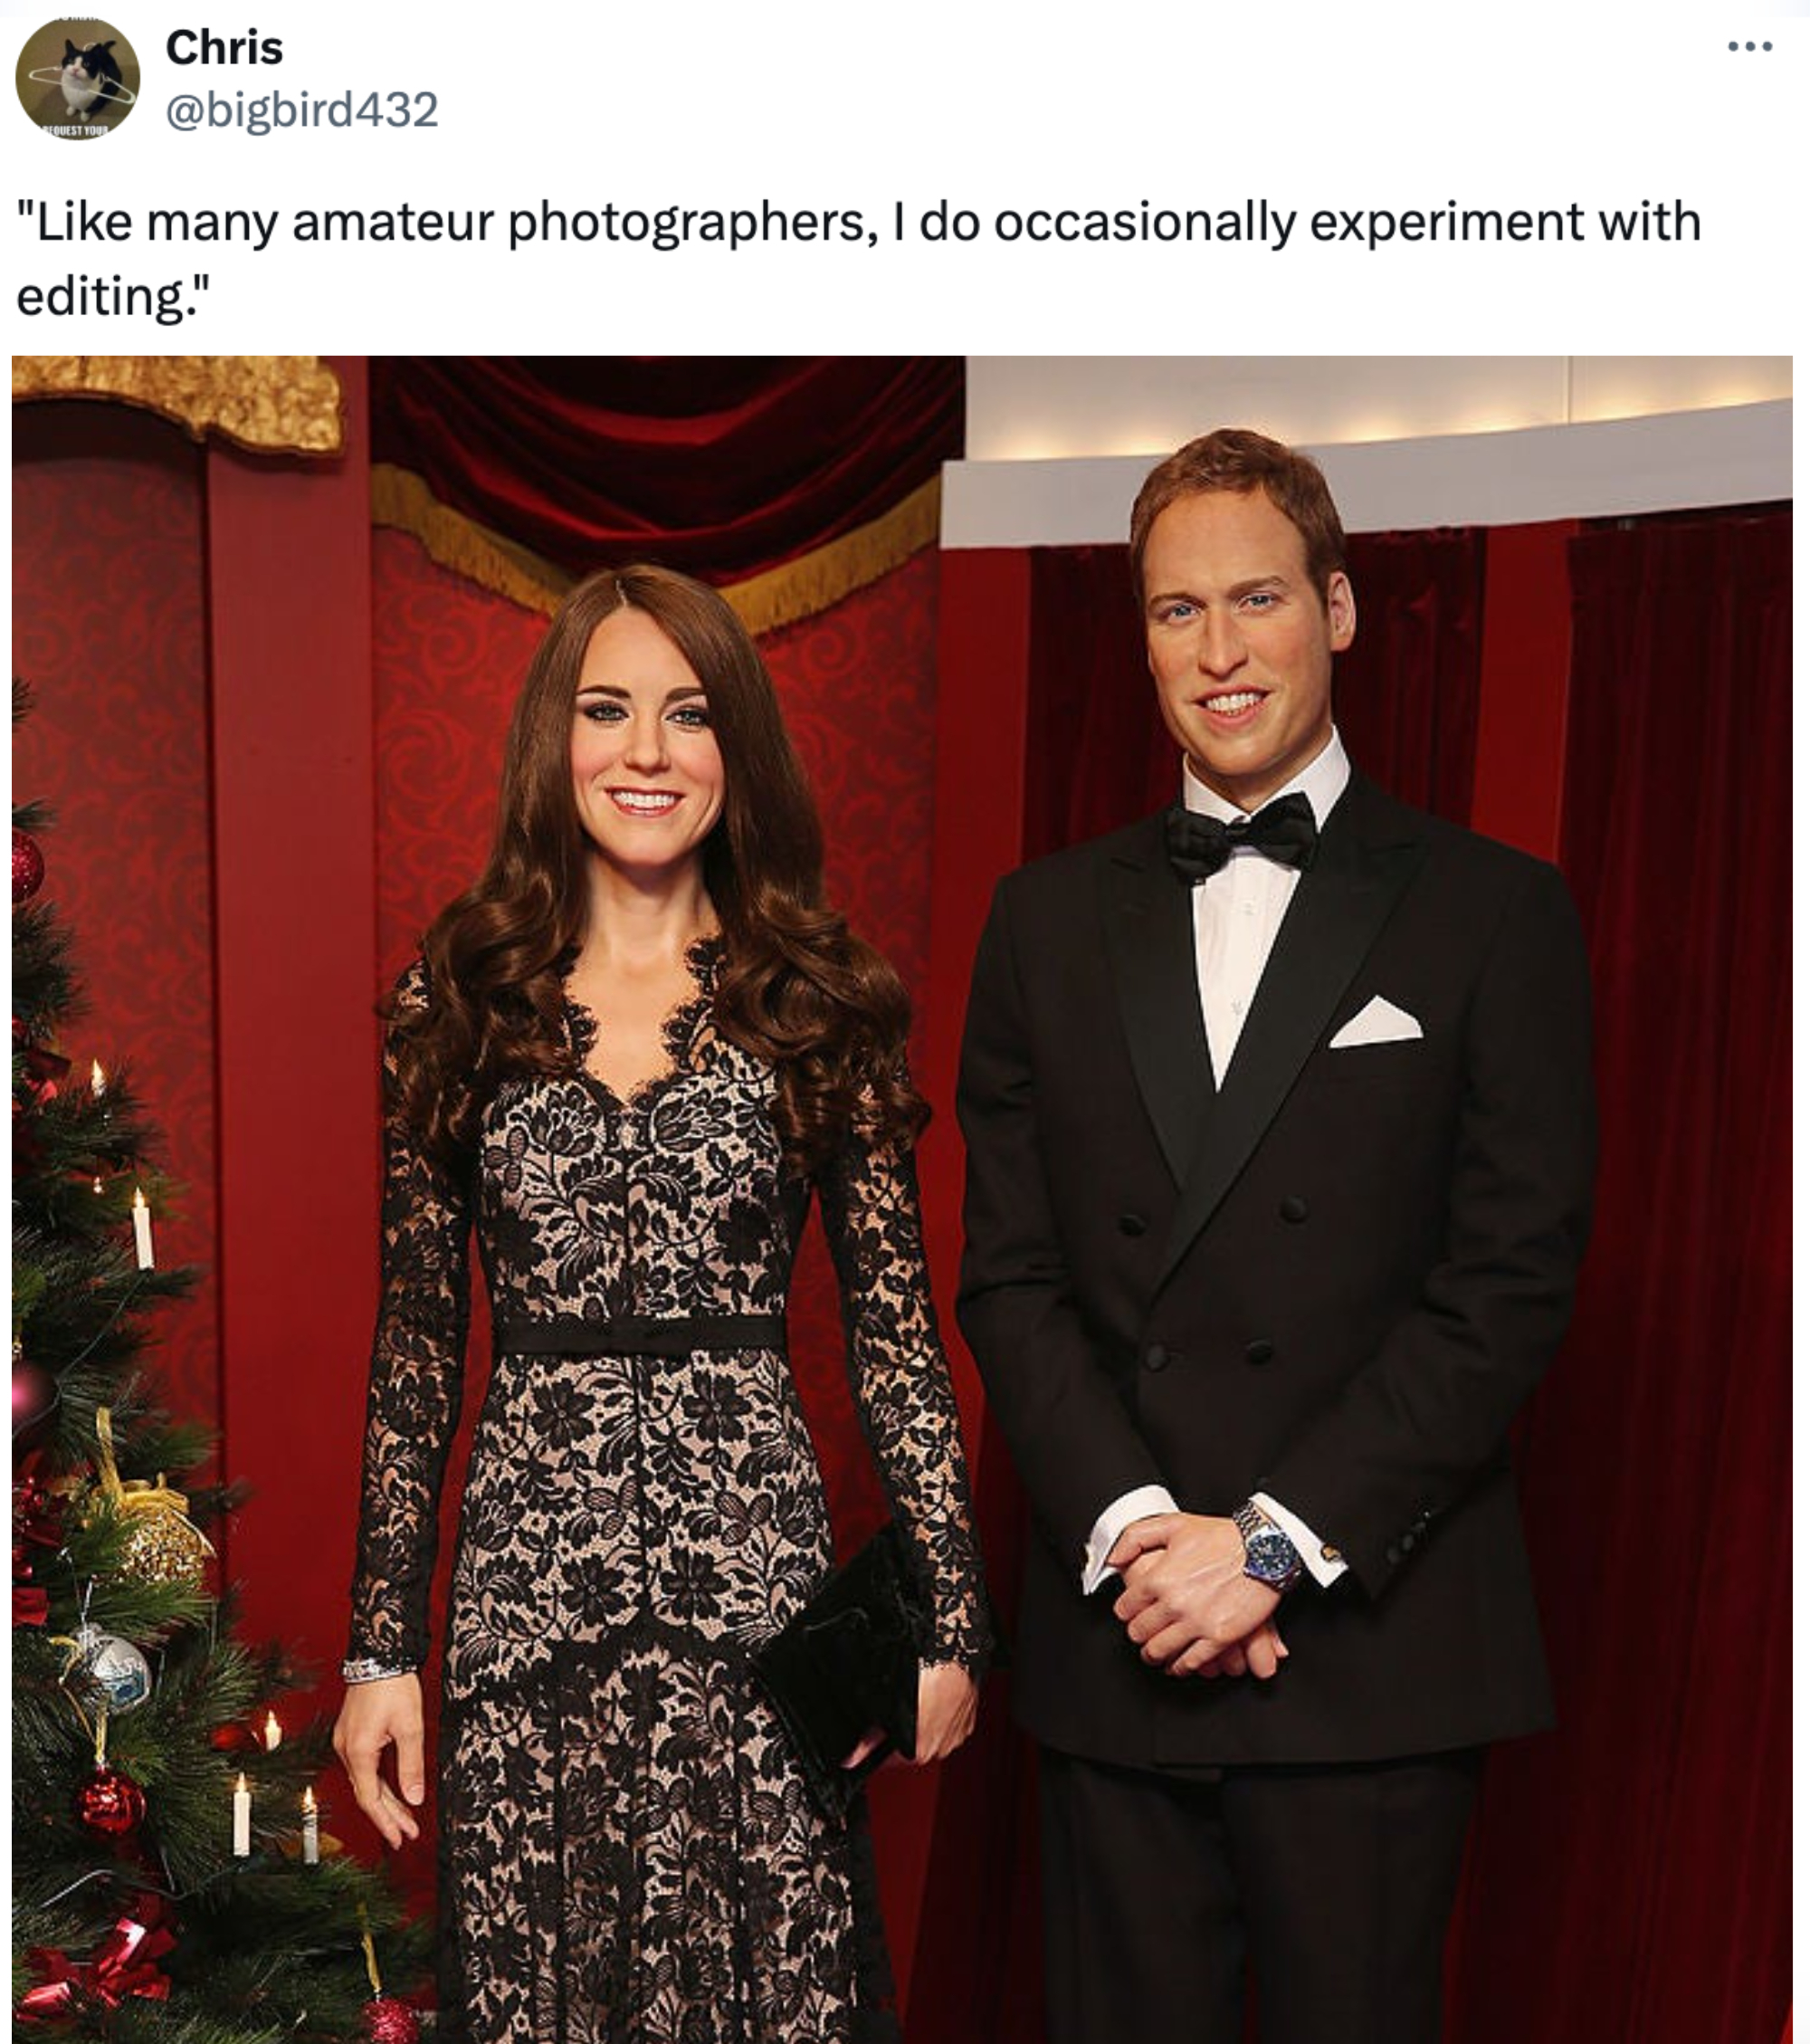 Wax figures resembling Kate Middleton in a lace dress and Prince William in a tuxedo at a museum exhibit next to a Christmas tree